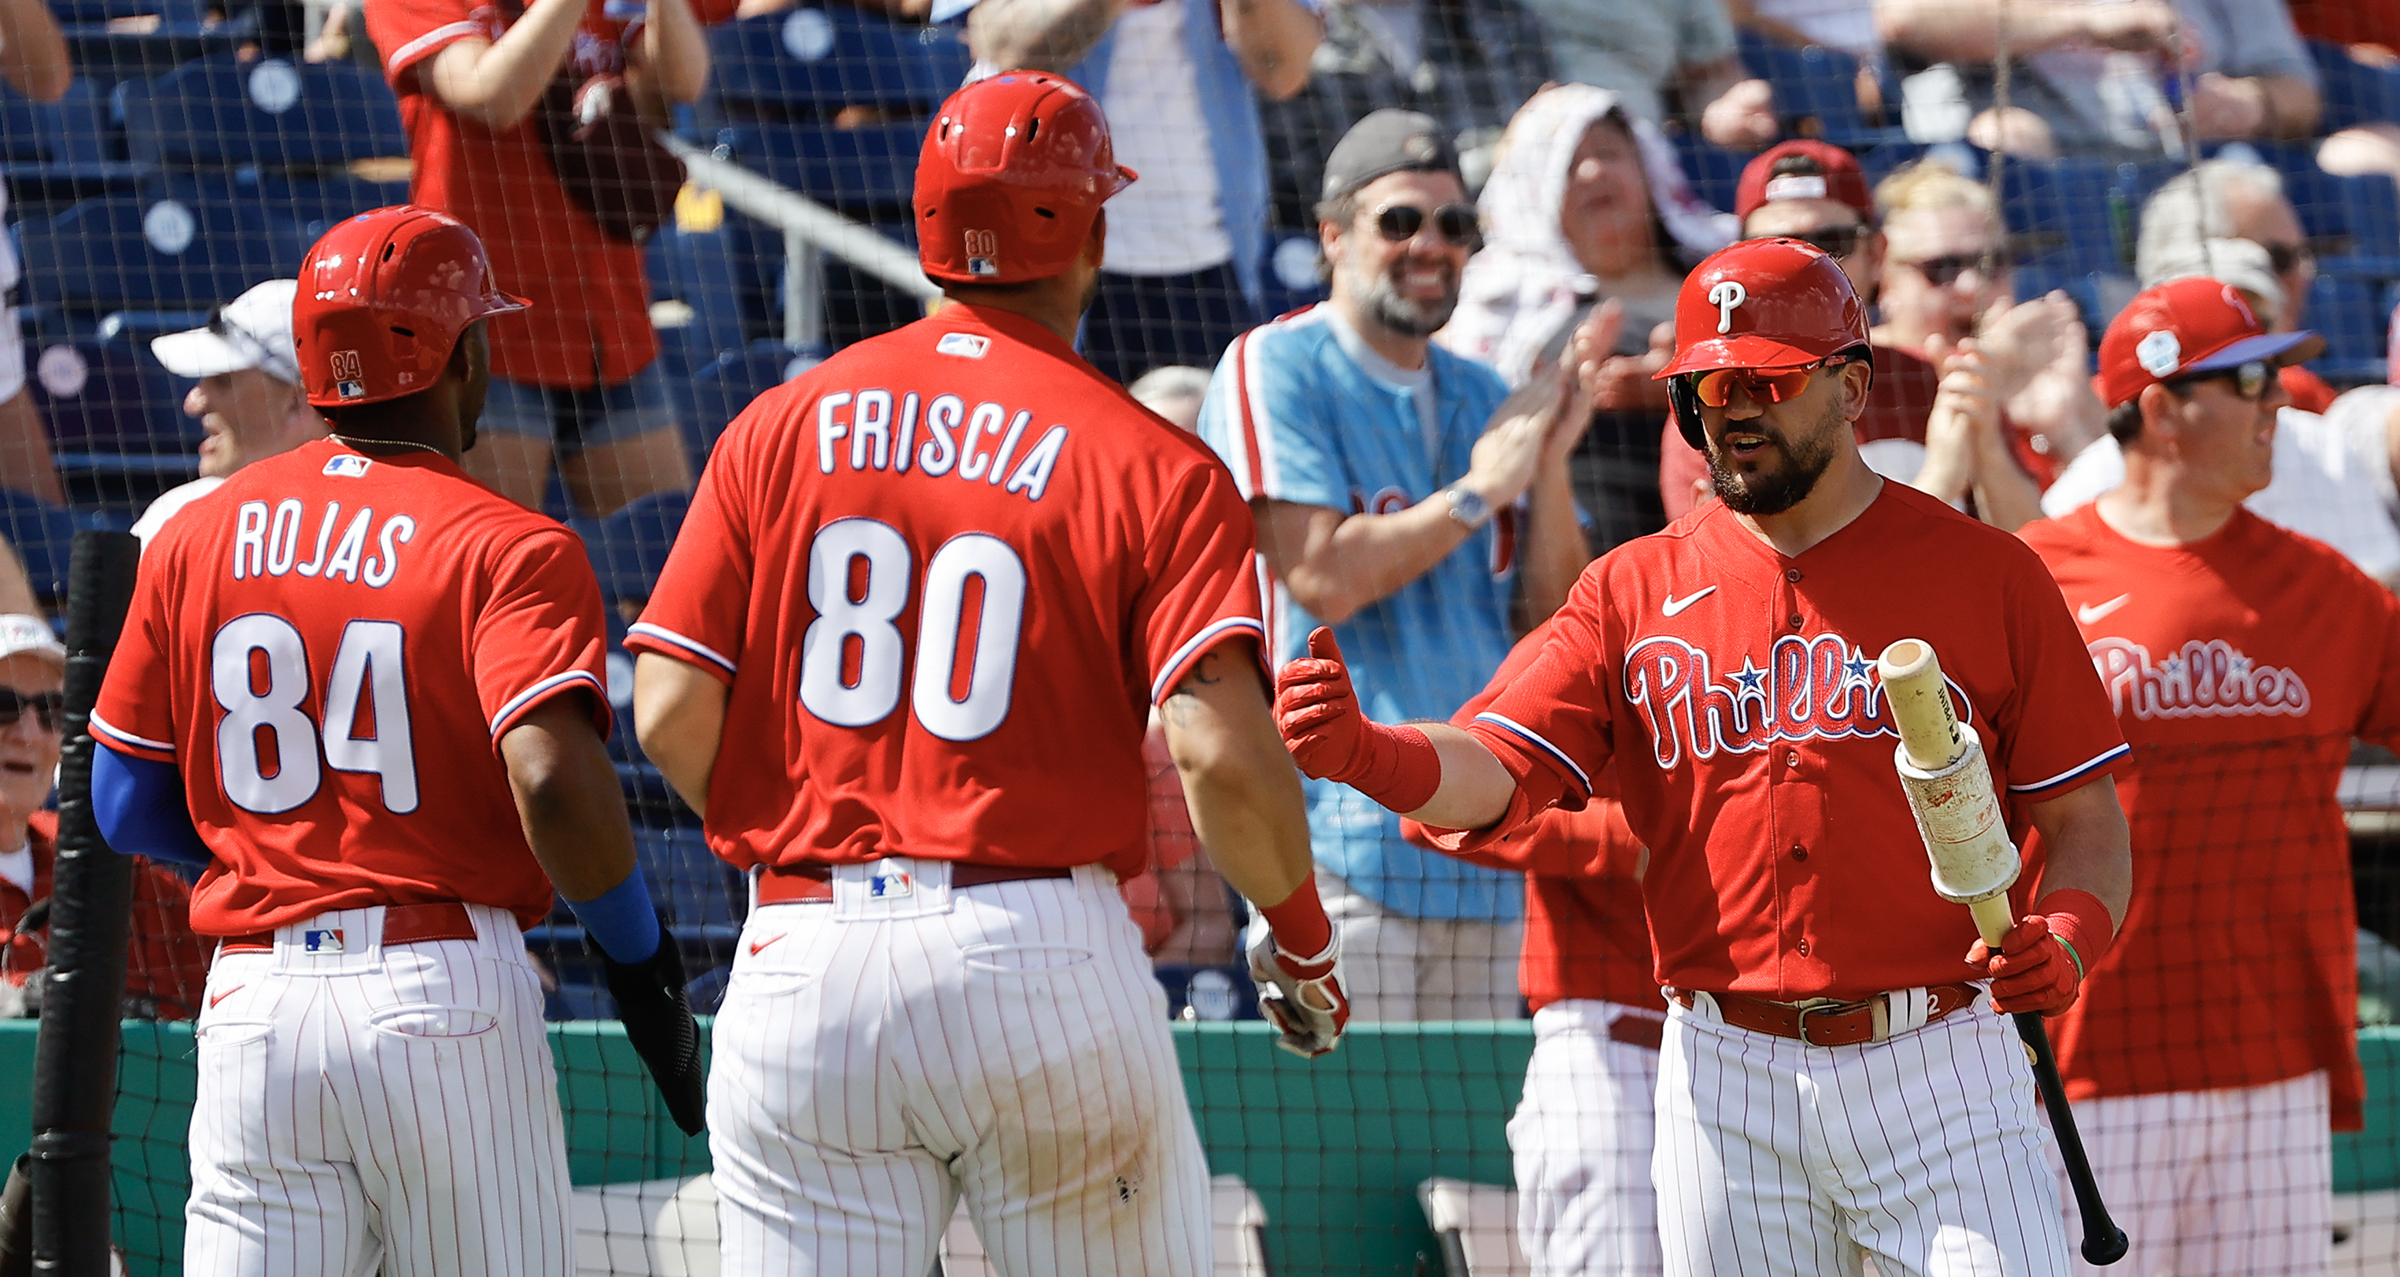 Phillies spring training: Baseball's attempt to speed up the game